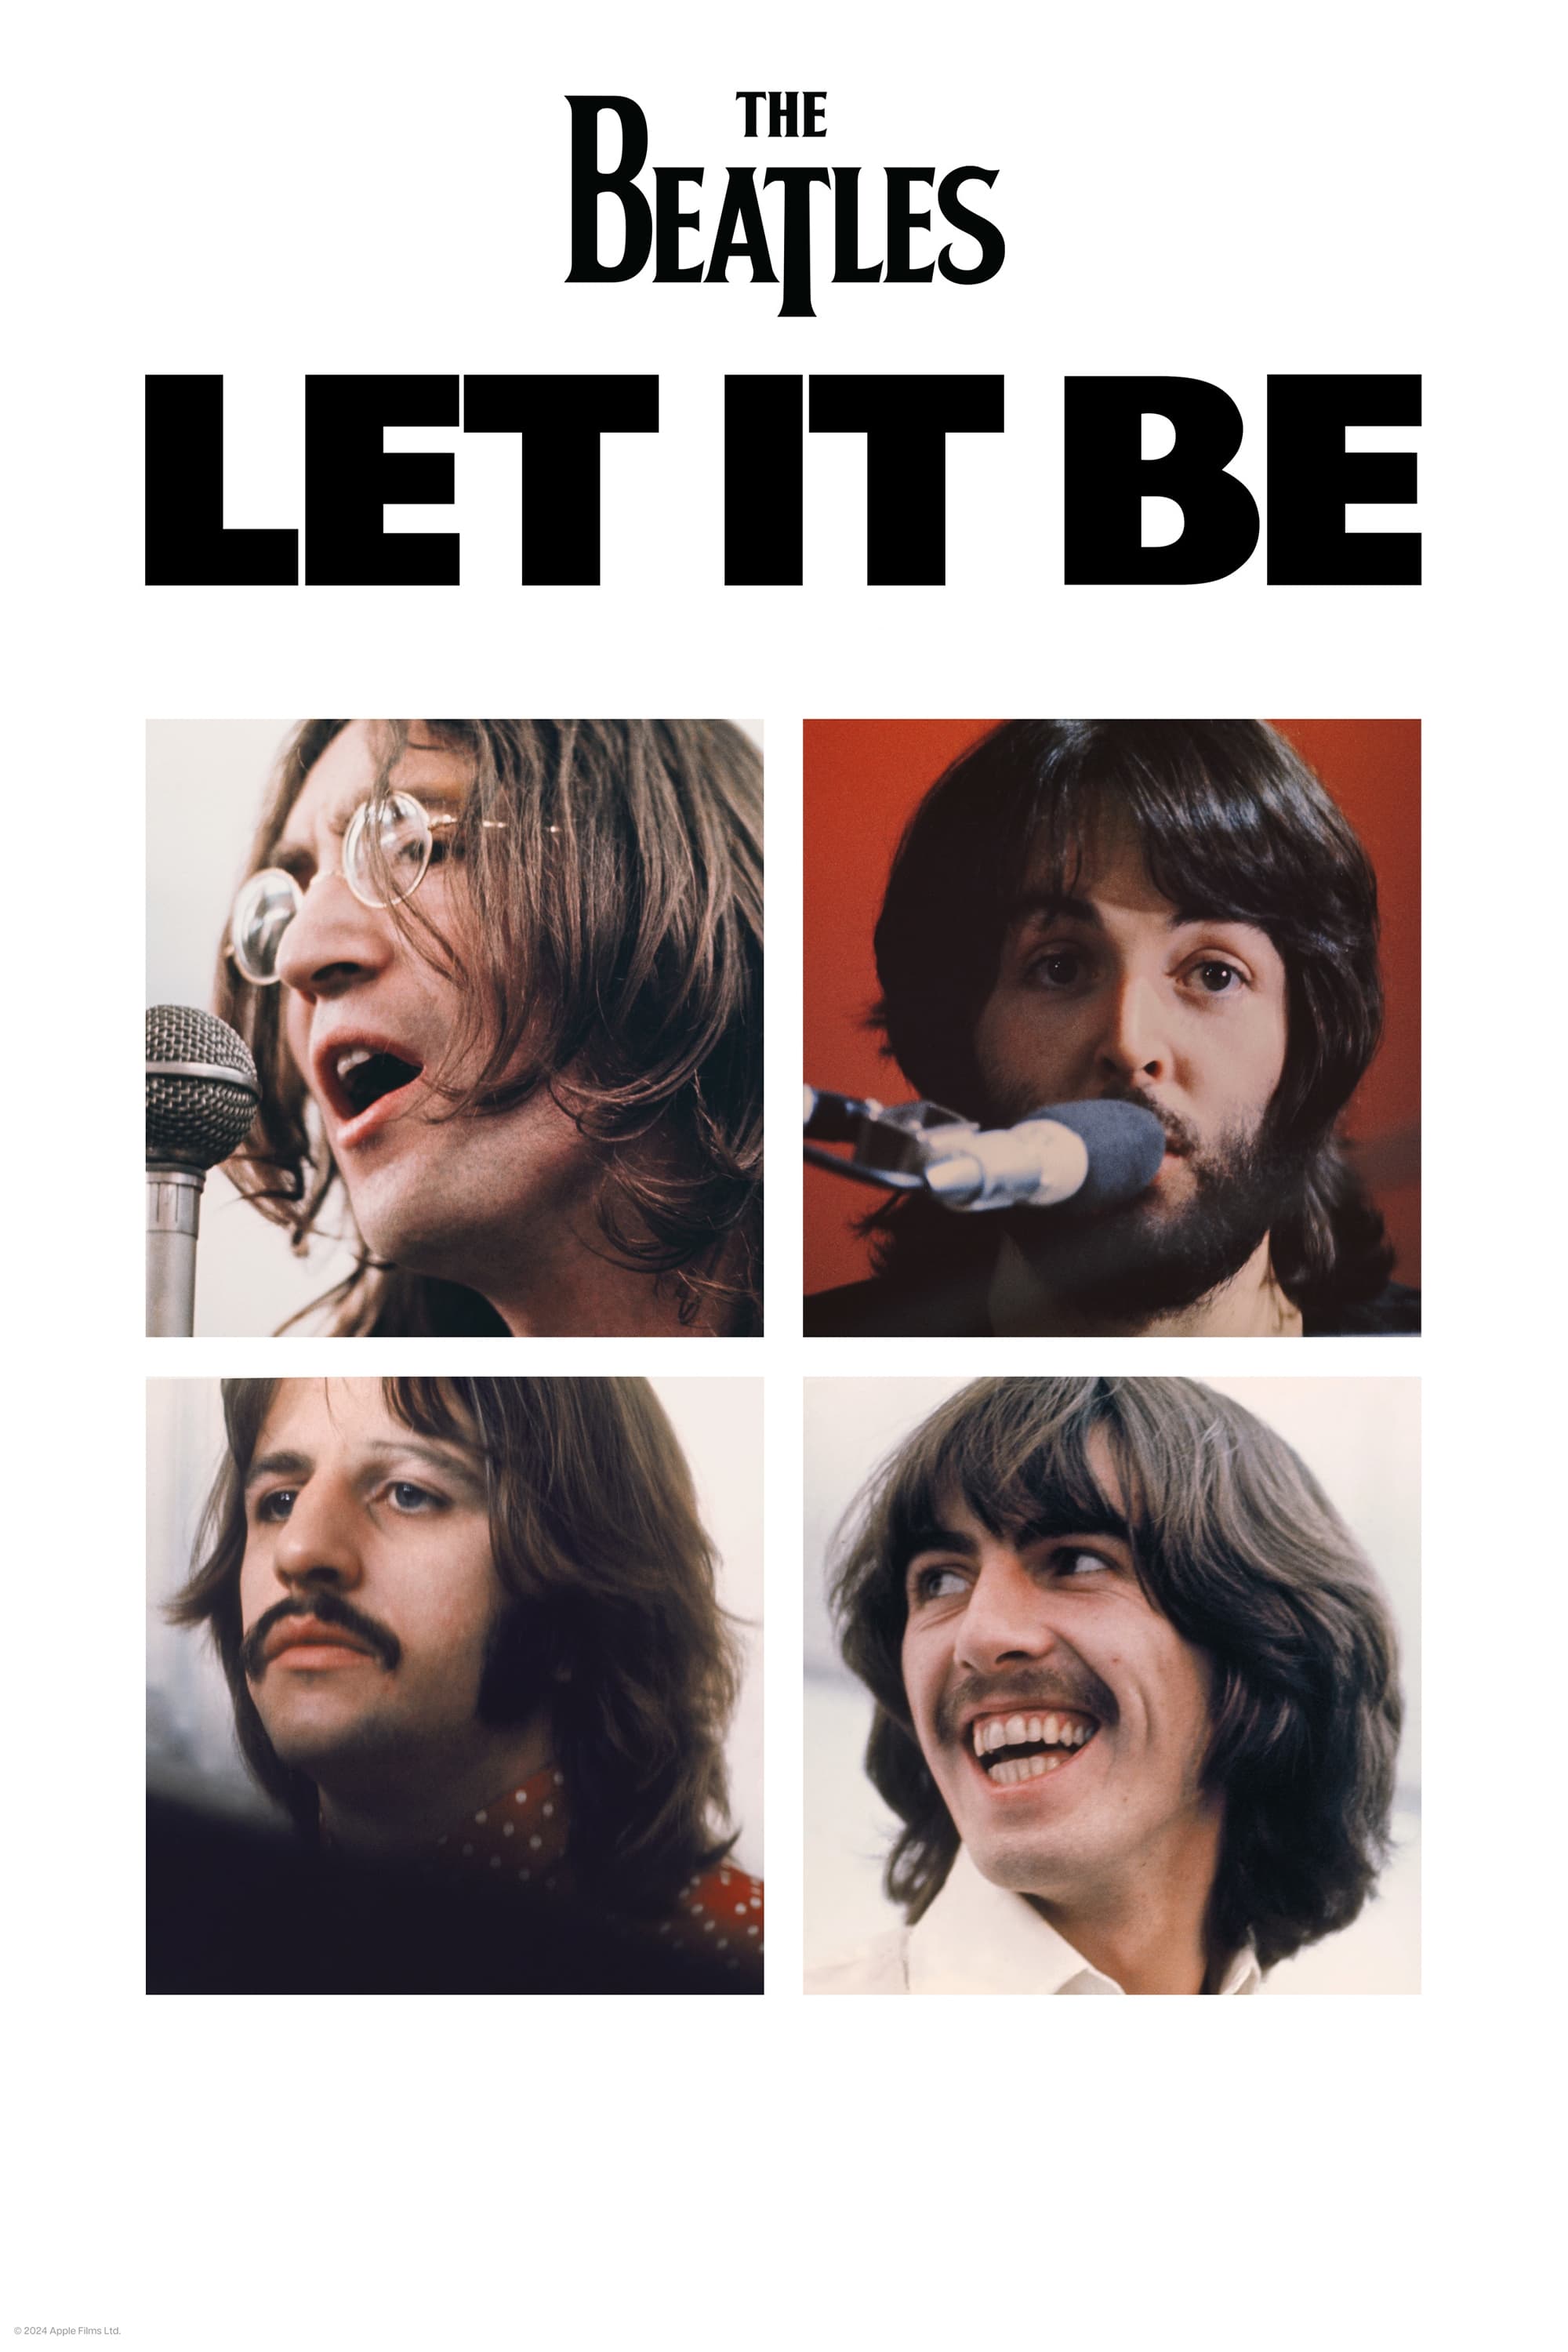 The Beatles: Let it be